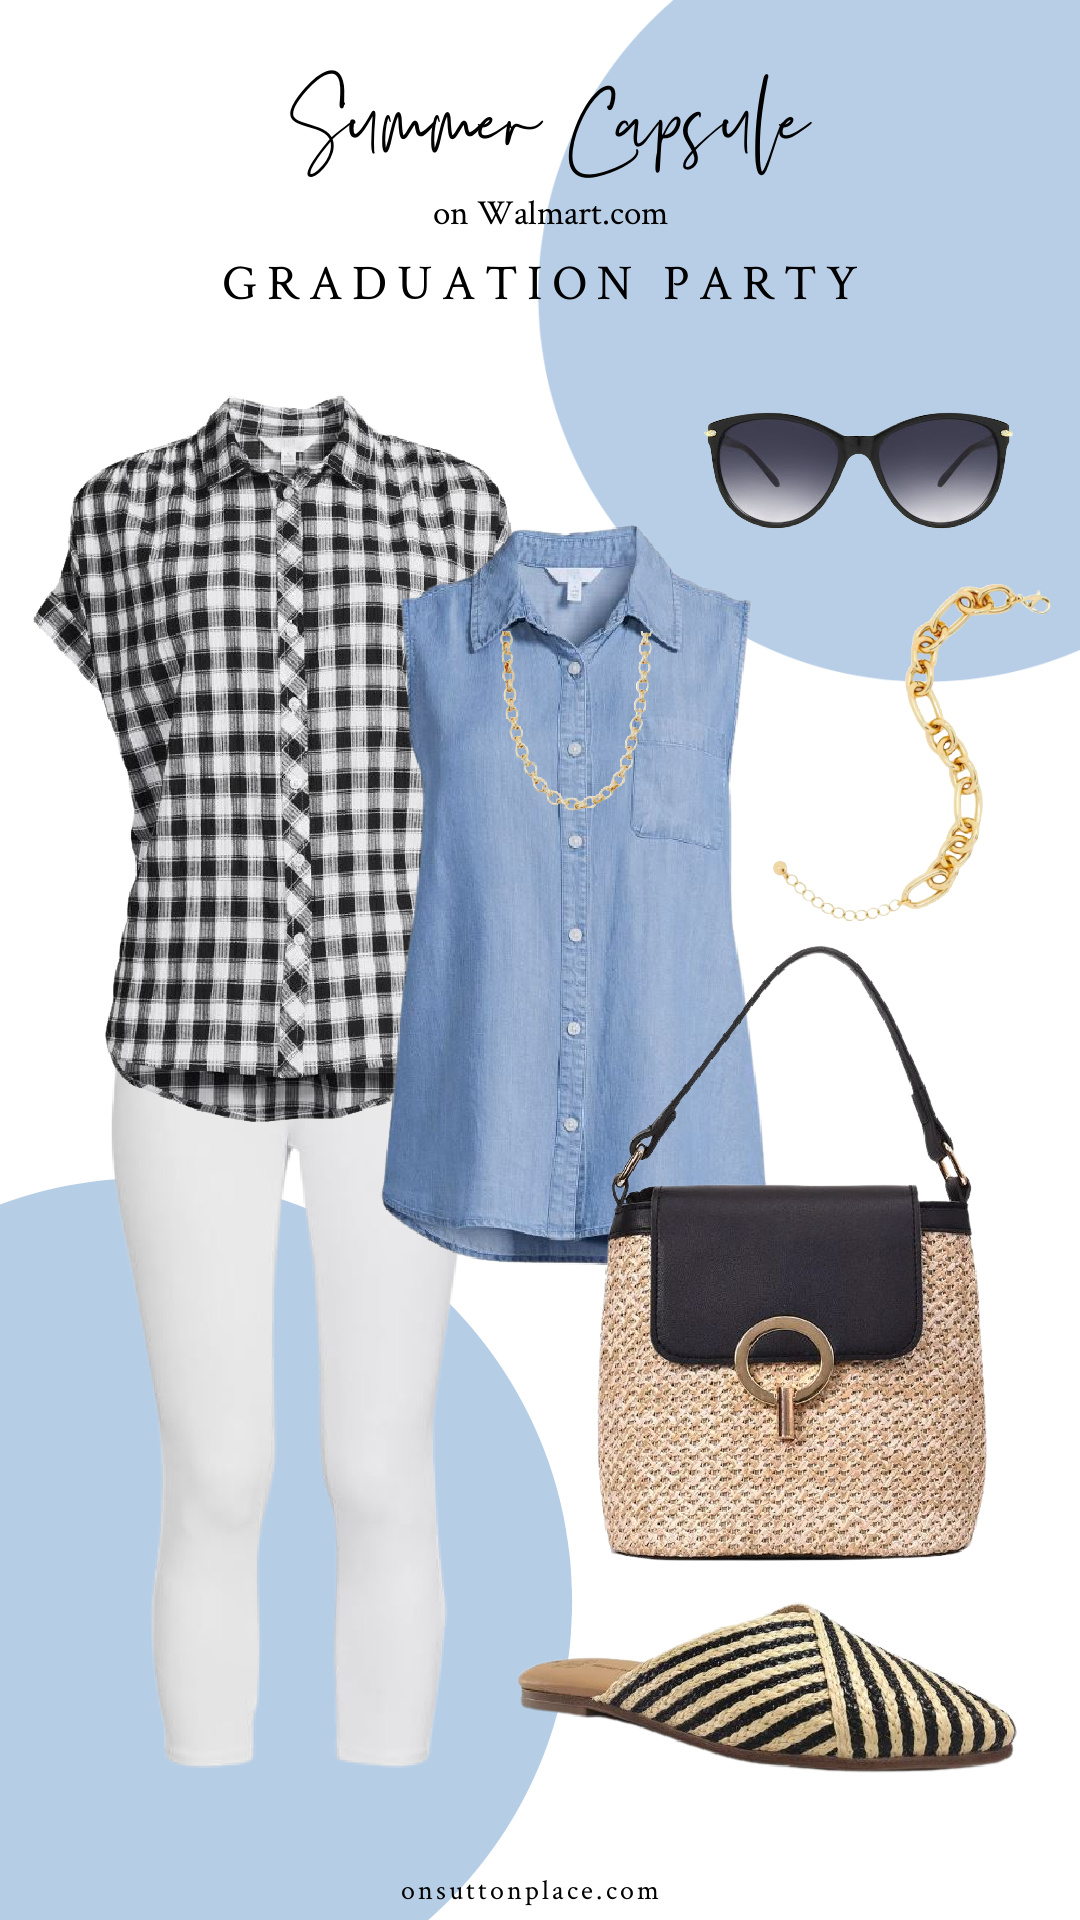 Summer Capsule Wardrobe With Walmart - On Sutton Place